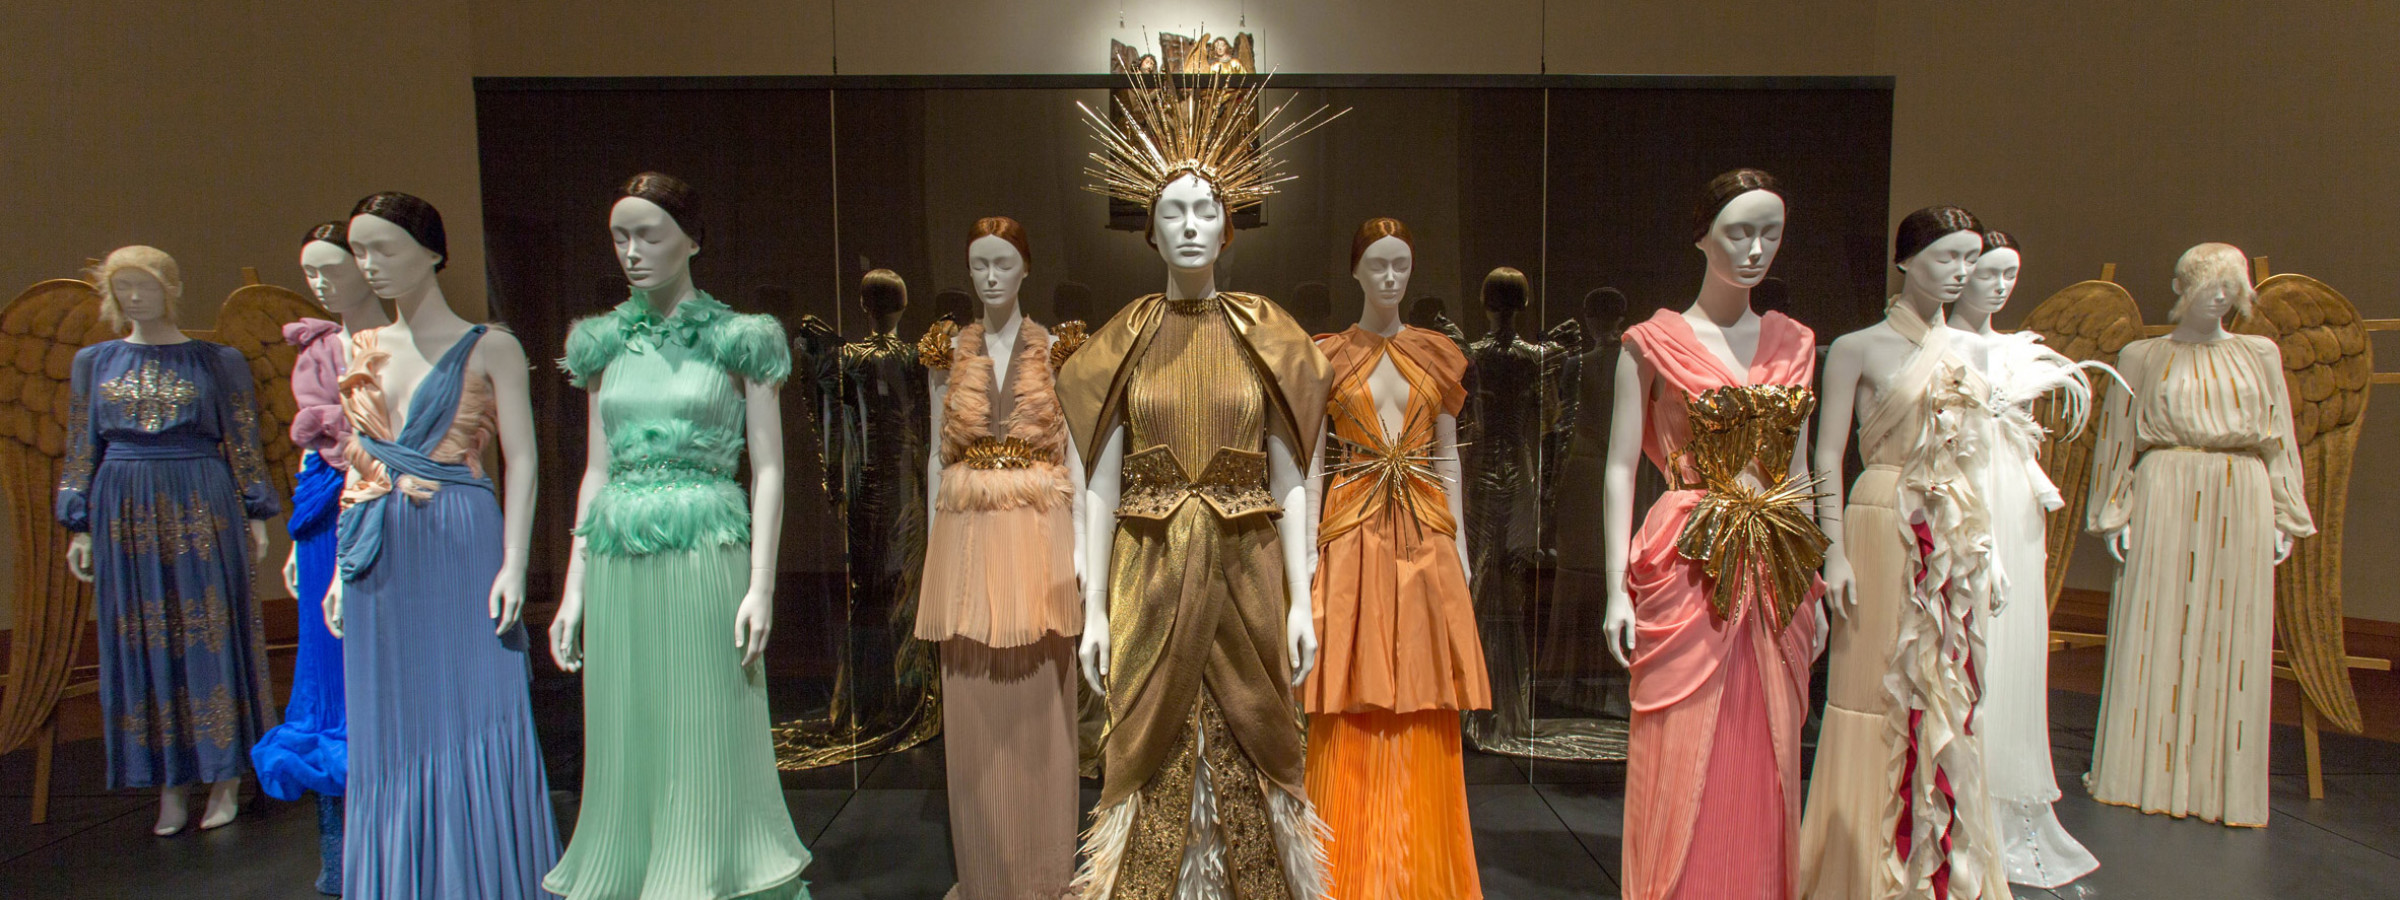 Installation view at Heavenly Bodies, courtesy The Metropolitan Museum of Art